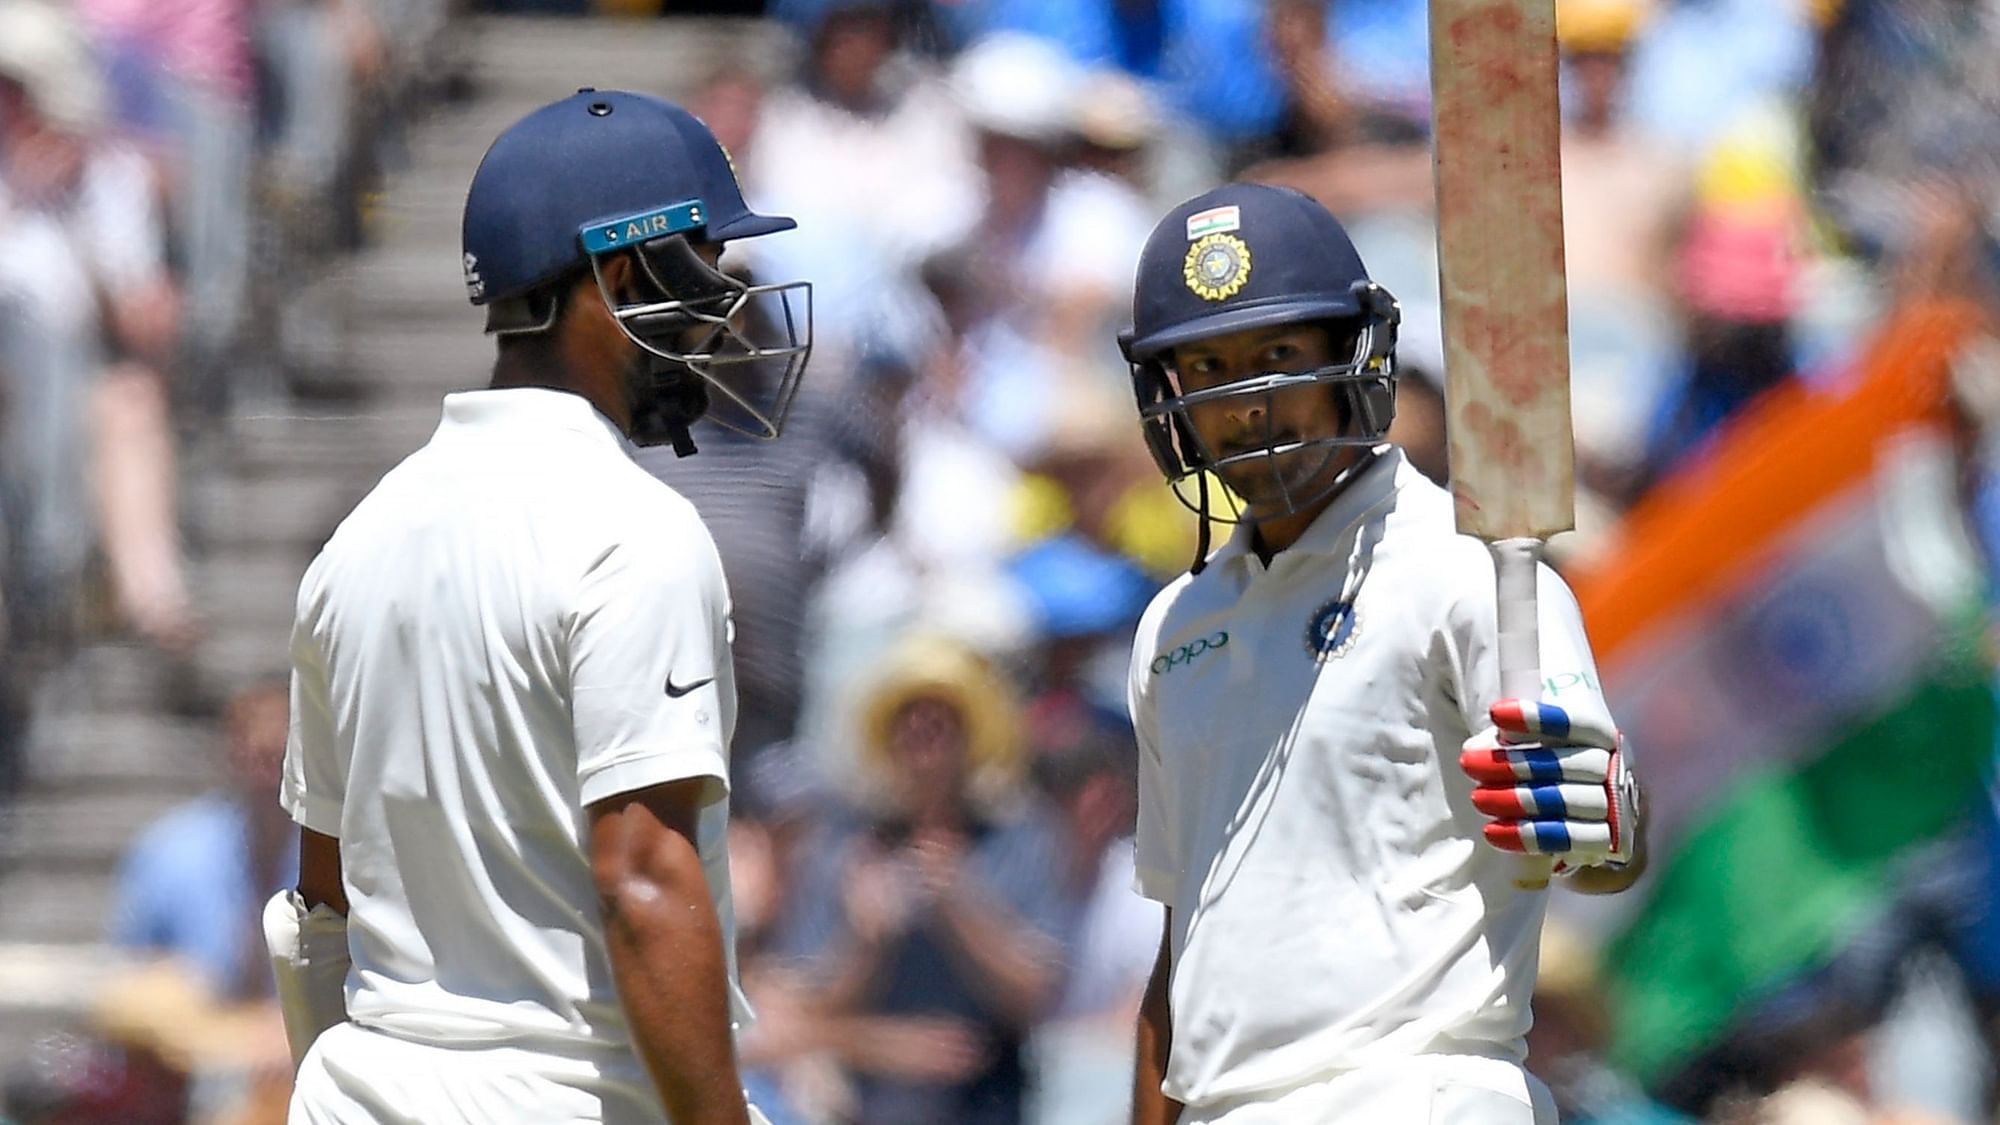 India’s Mayank Agarwal, right celebrates with team-mate, left Cheteshwar Pujara after scoring a half century on day one of the third cricket test between India and Australia in Melbourne, Australia, Wednesday, Dec. 26, 2018.&nbsp;